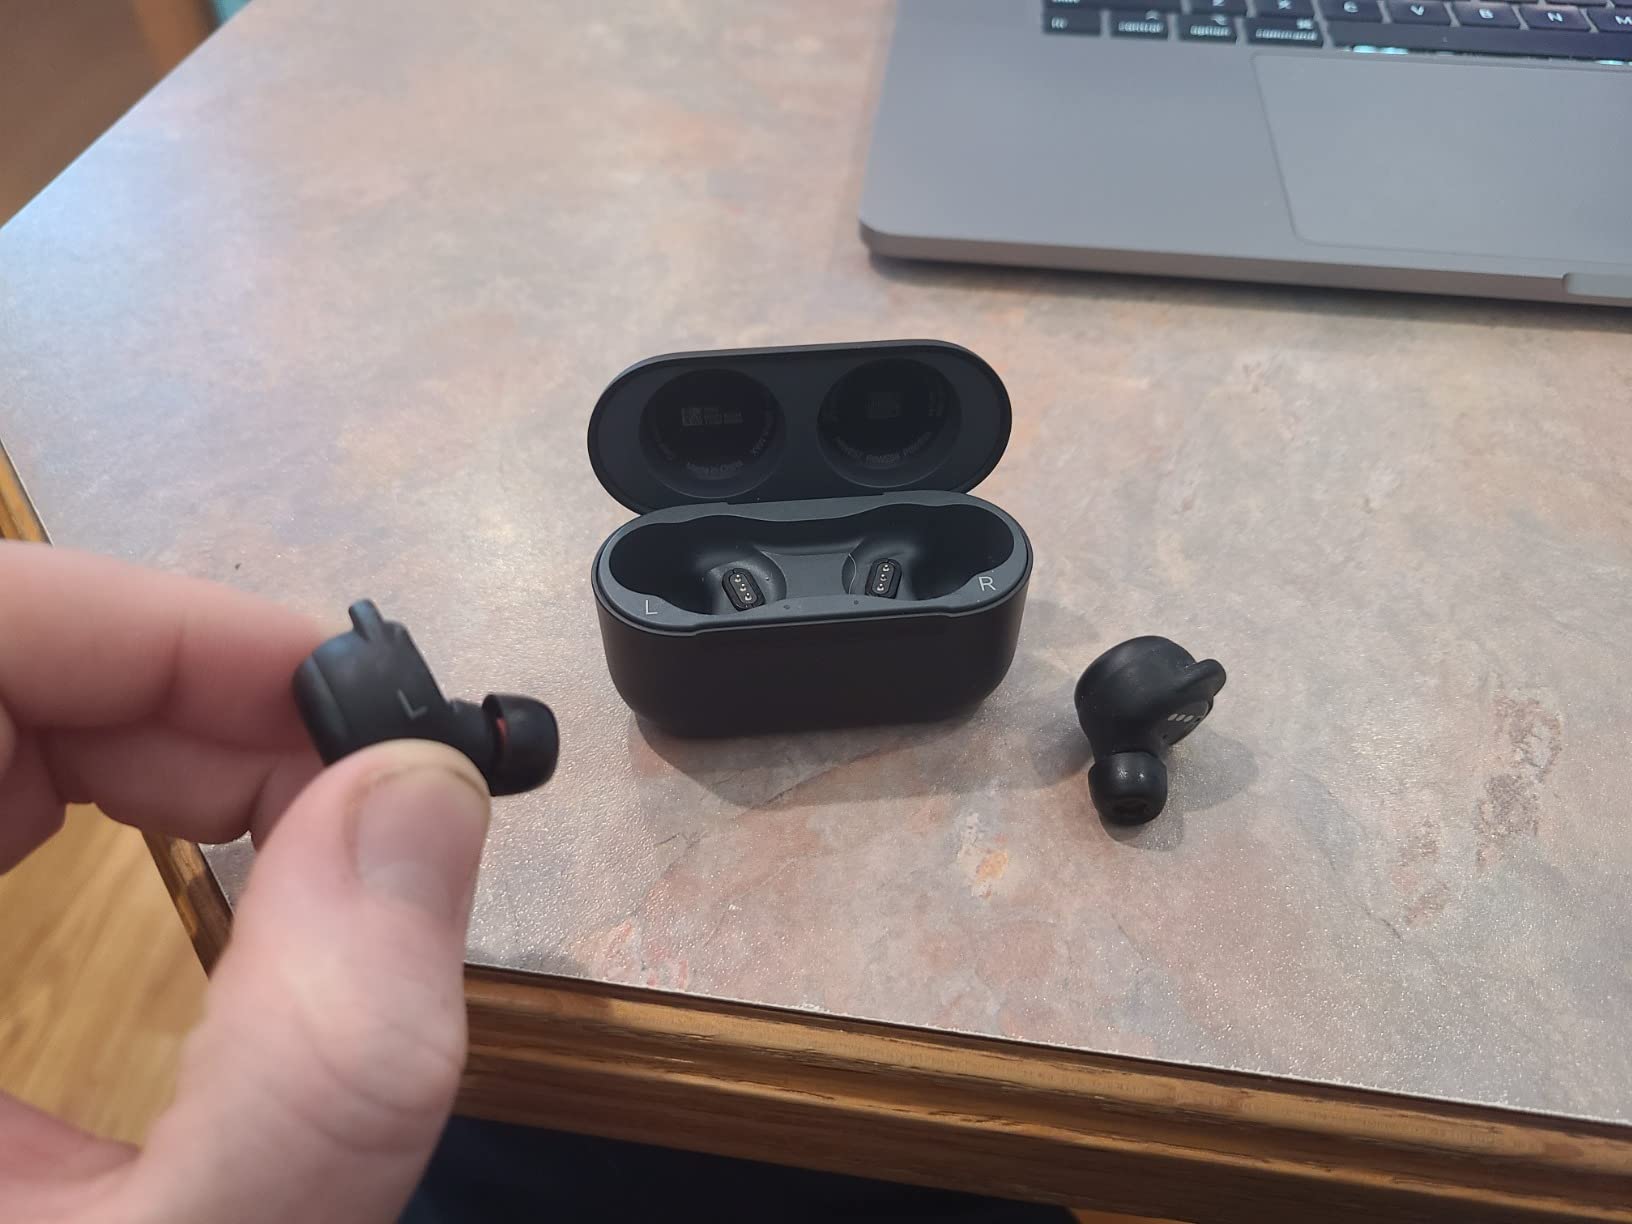 These ear buds are almost too good to be true! Incredible value